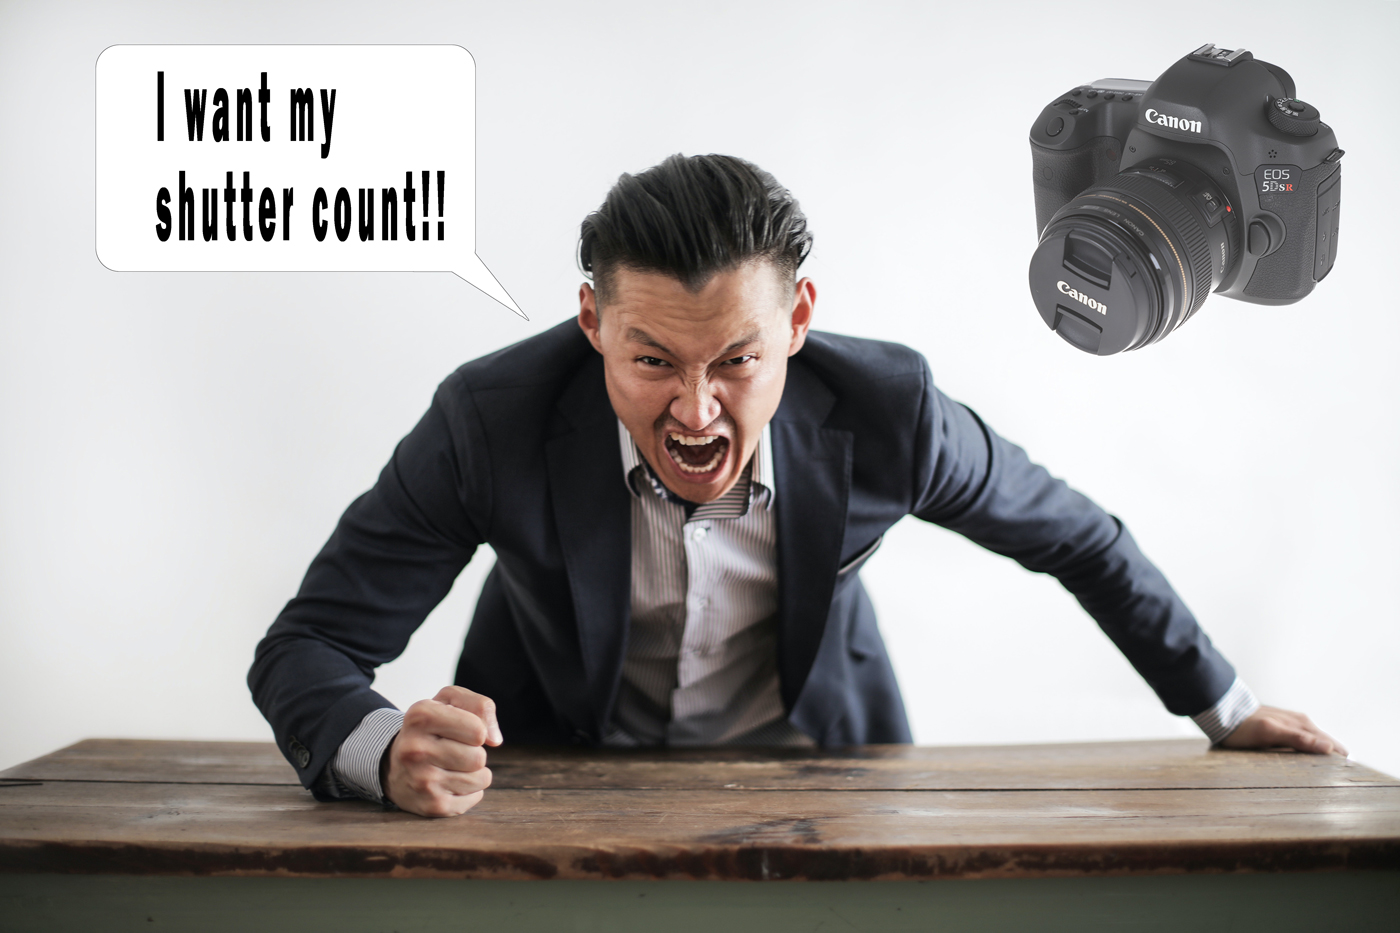 Angry photographer cannot get his shutter count